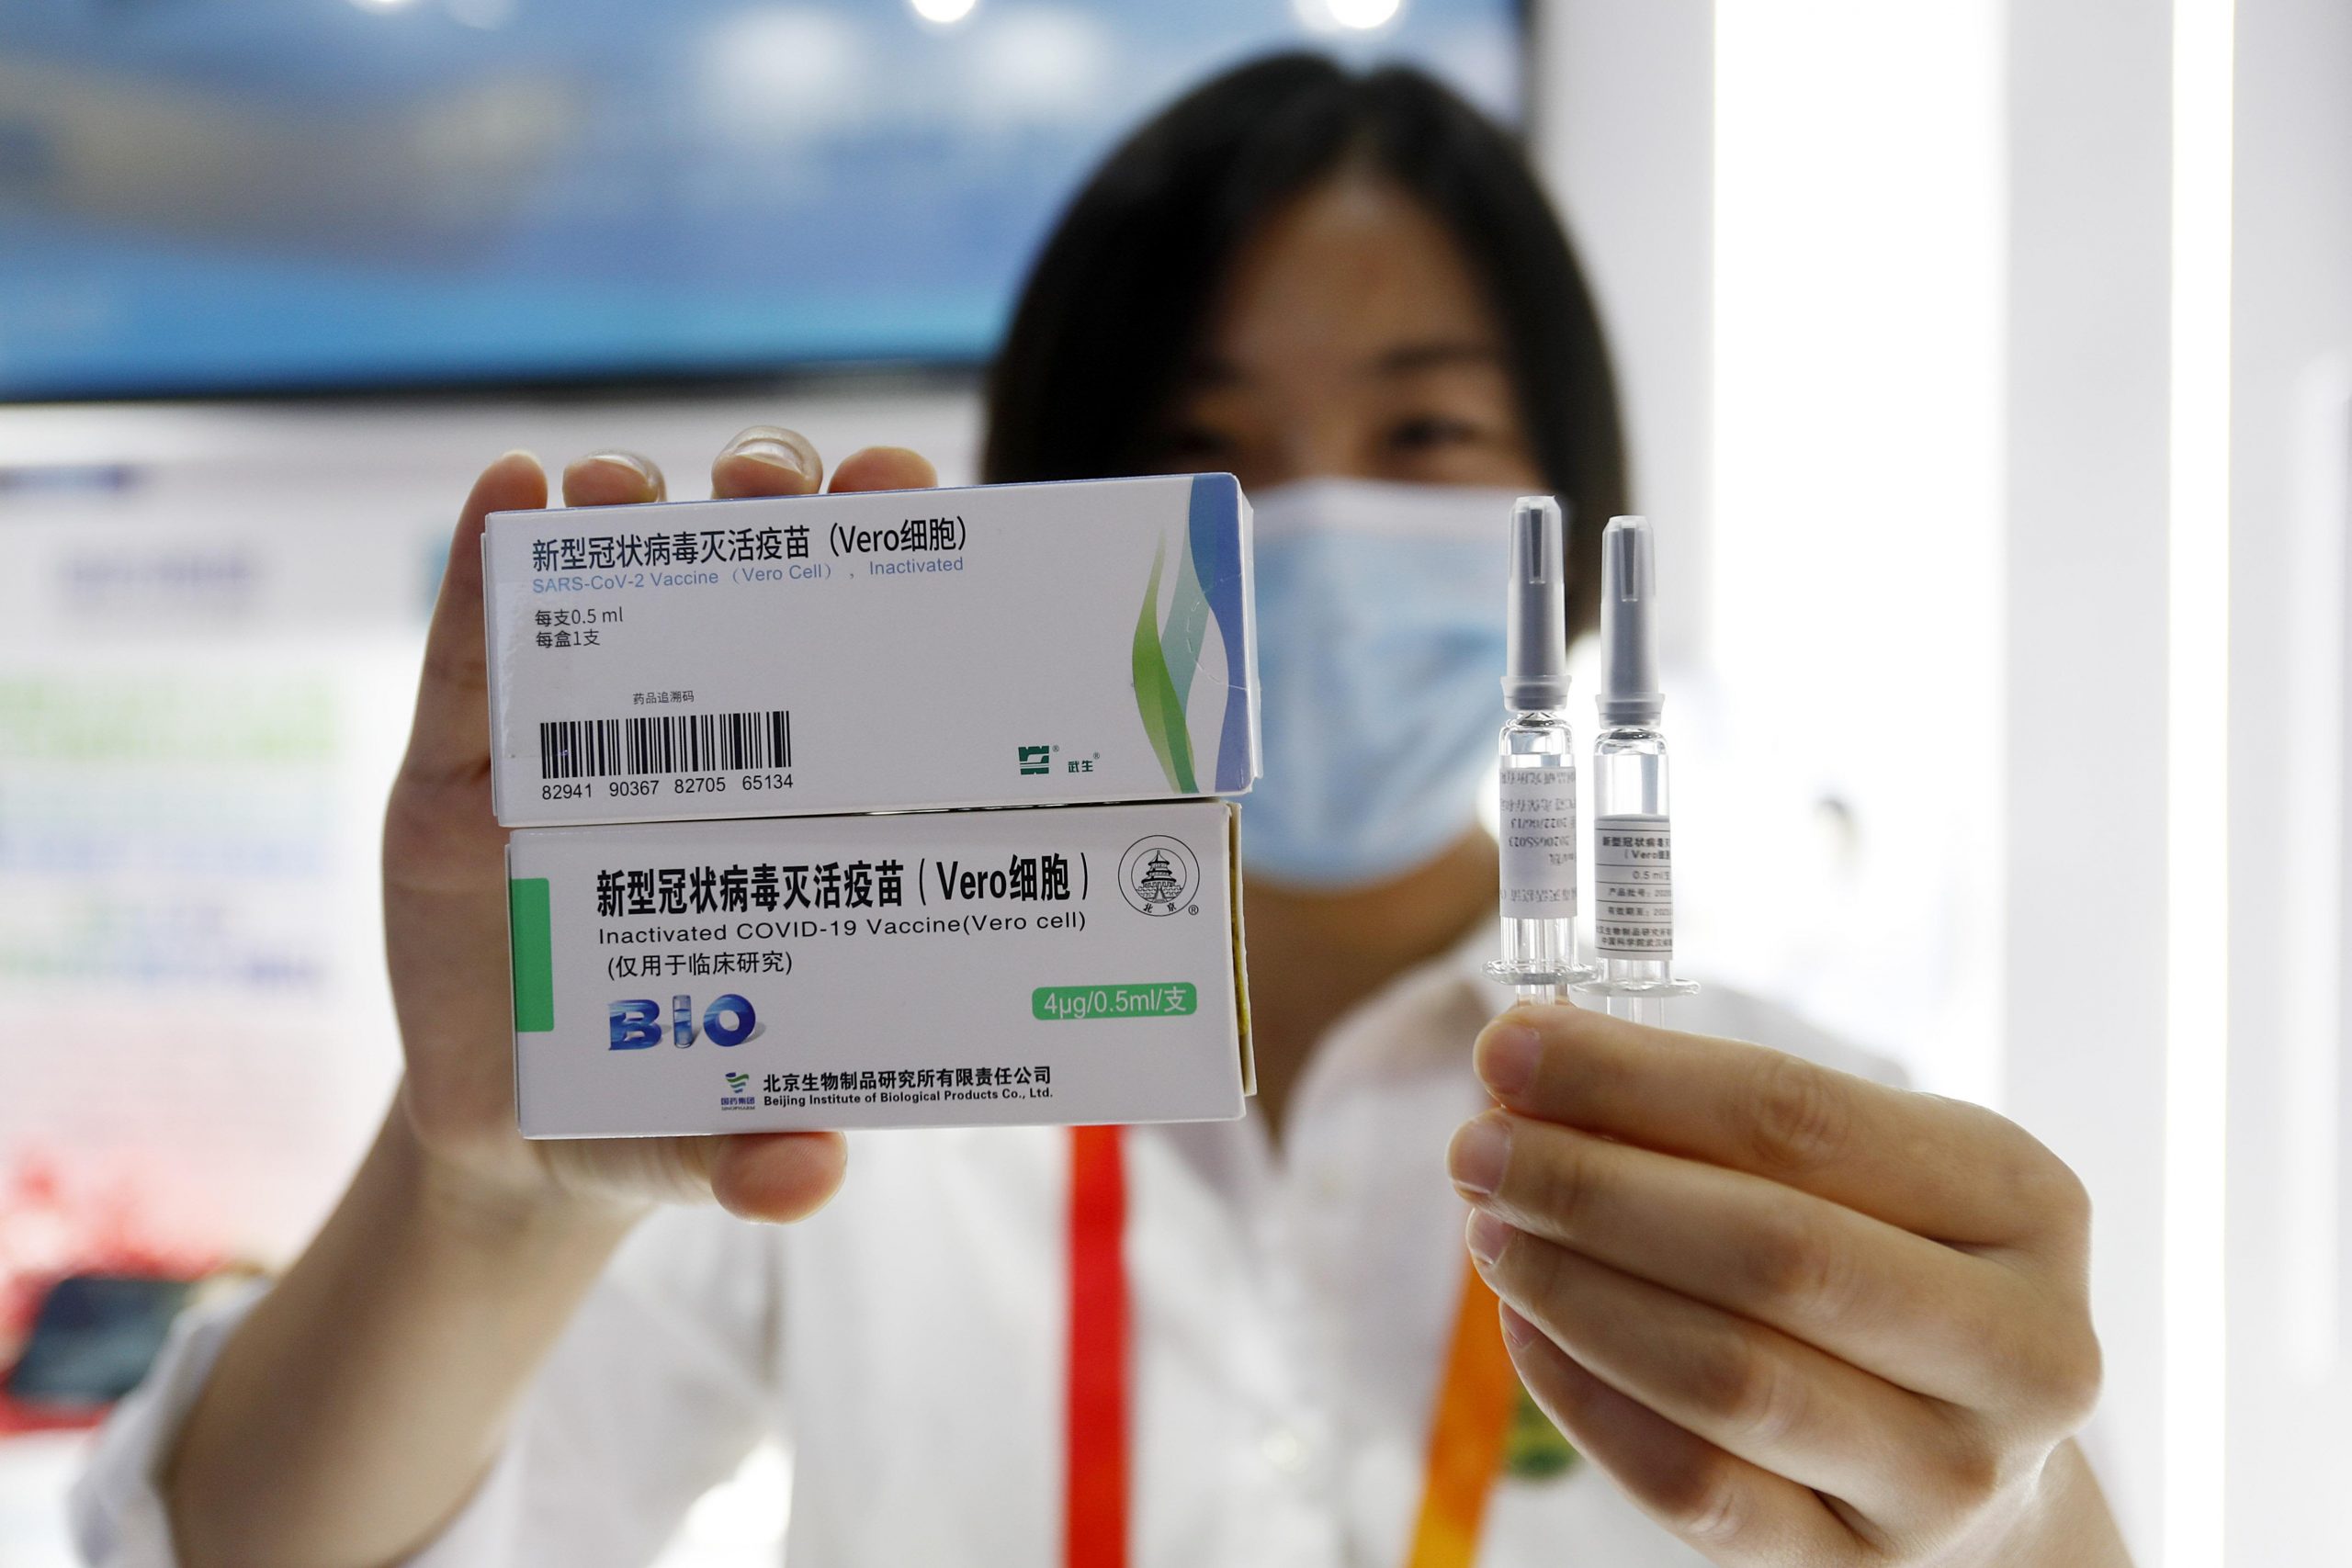 China’s Covid vaccine from Sinopharm is 86% efficient, UAE says